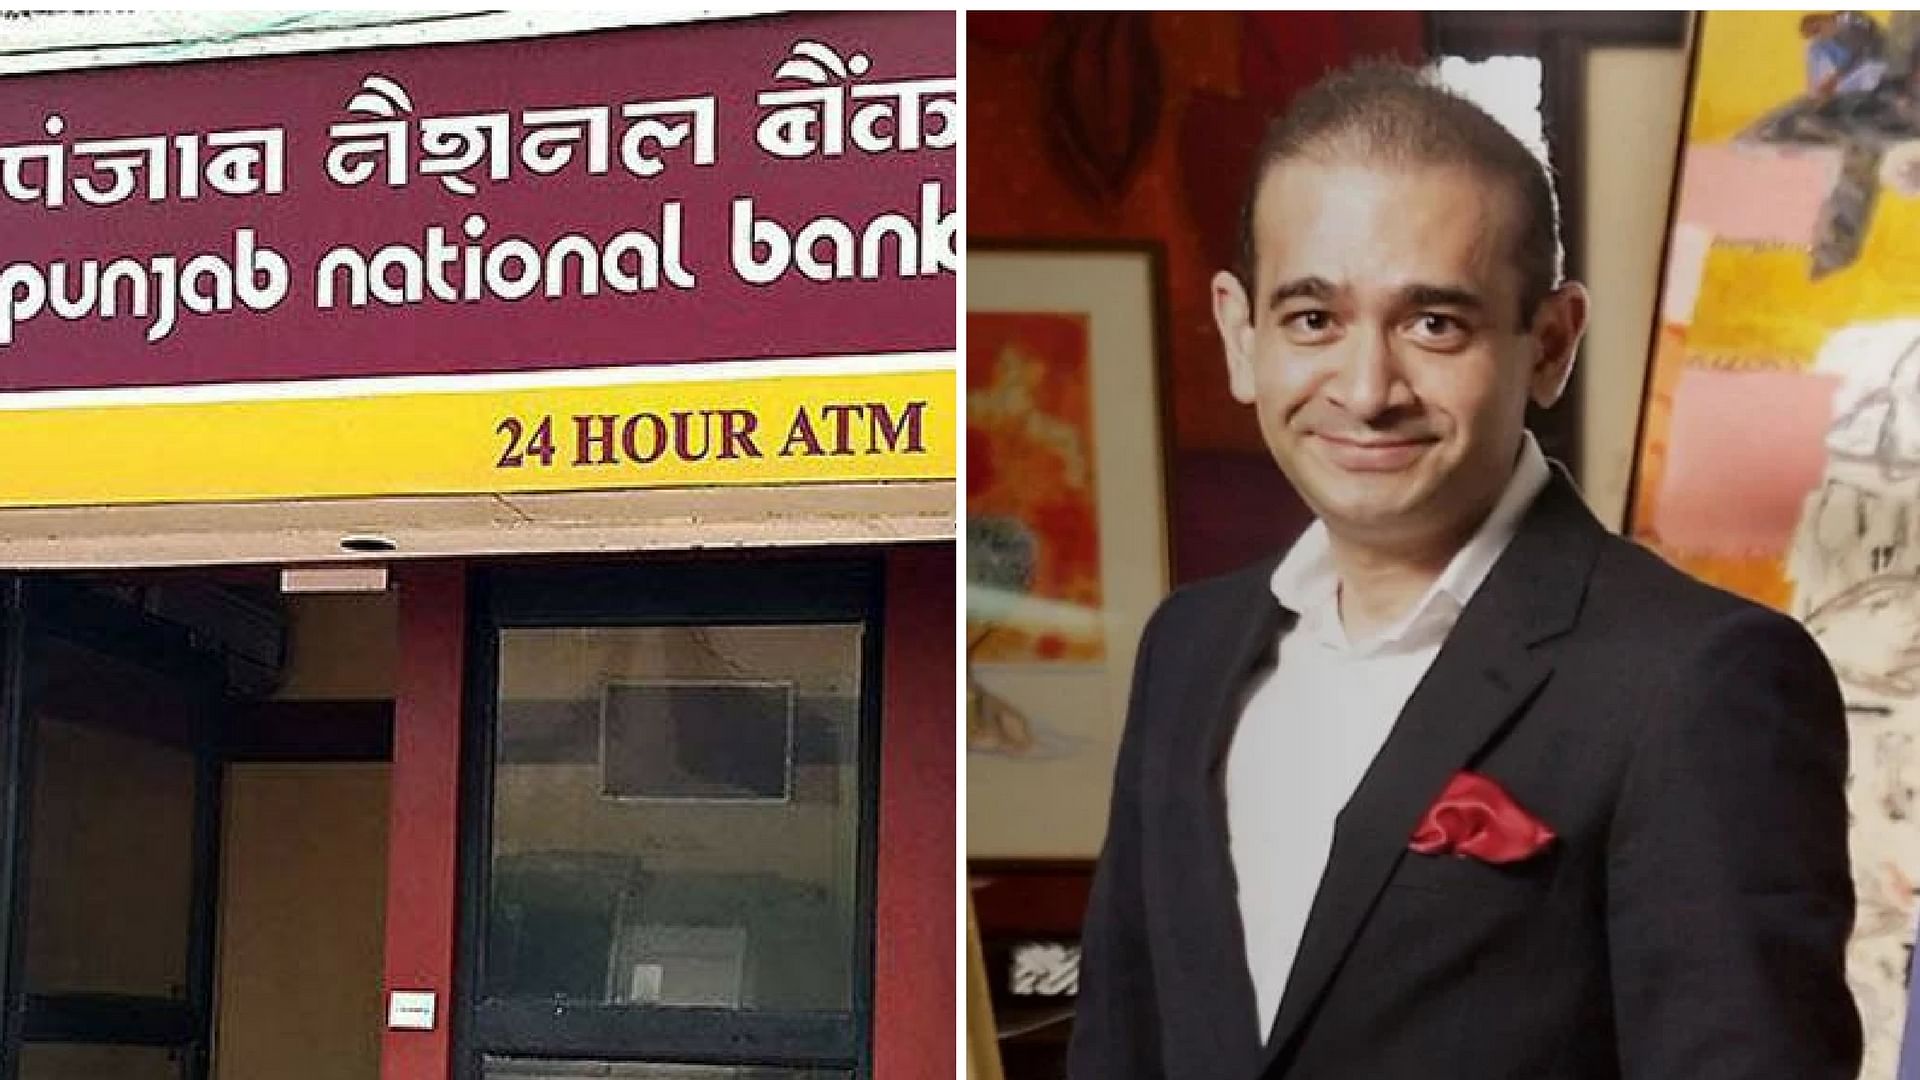 State-owned lender Punjab National Bank (PNB) is at the centre of a $2 billion fraud – one of the largest to be detected across the Indian banking sector.